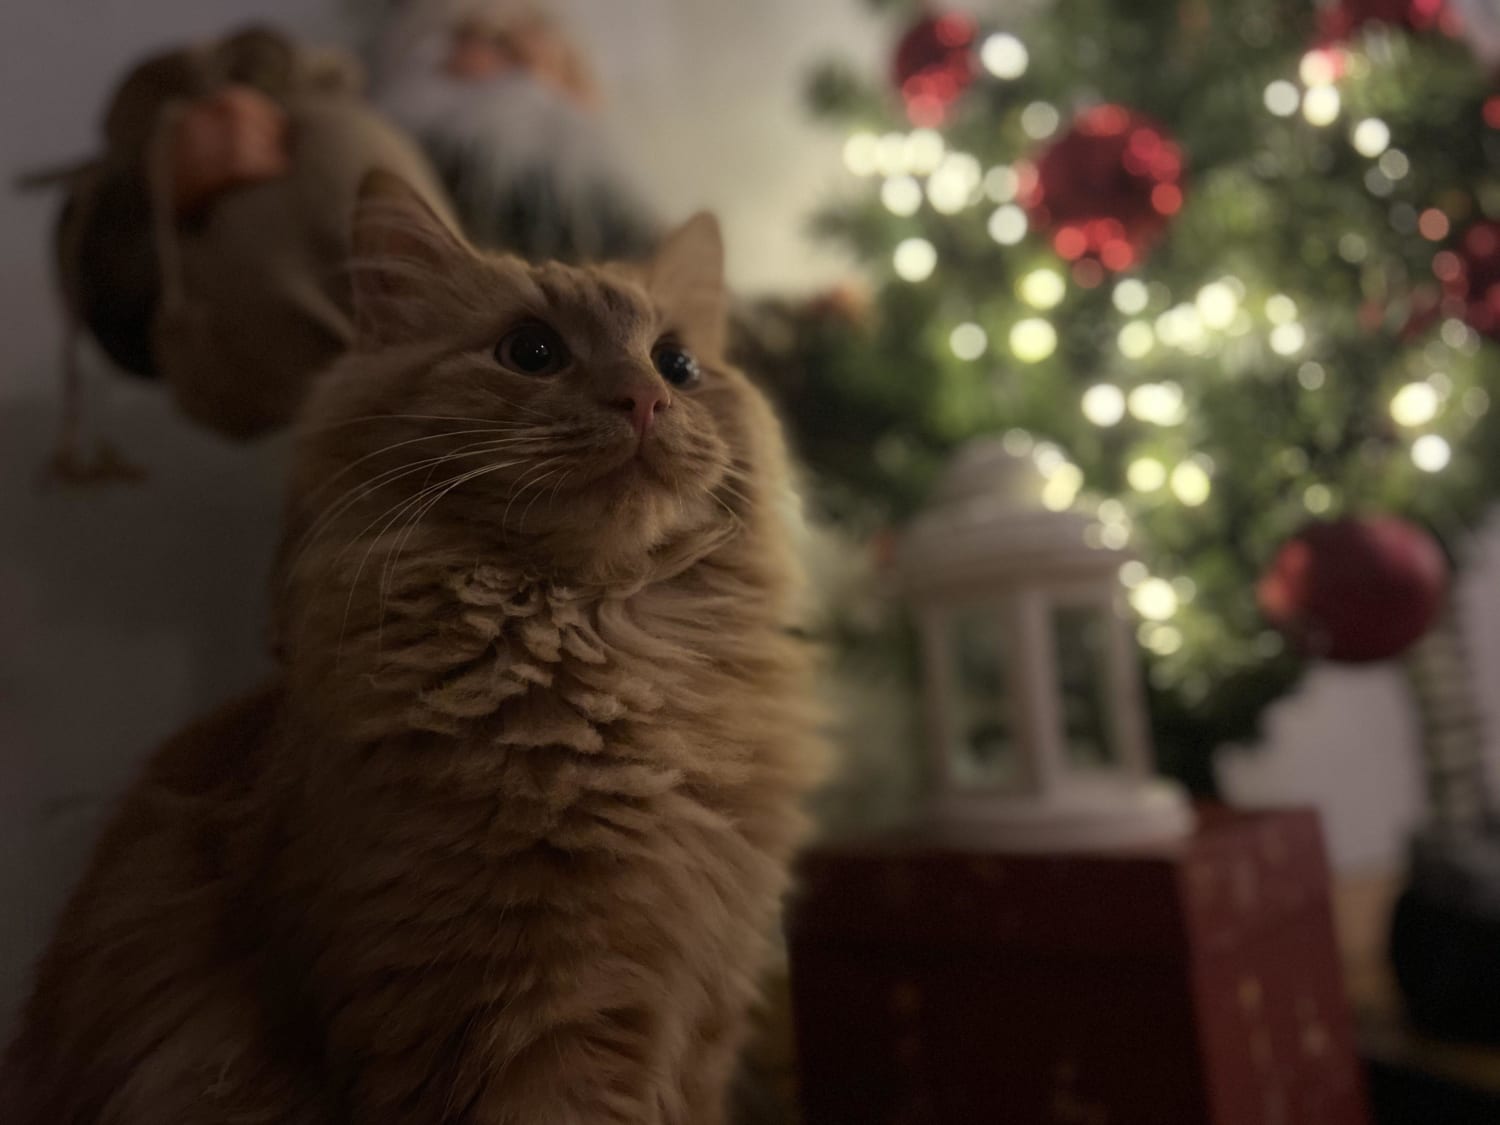 I rescued Gary off the streets of Detroit 5 months ago, now he's in a loving family enjoying Christmas!